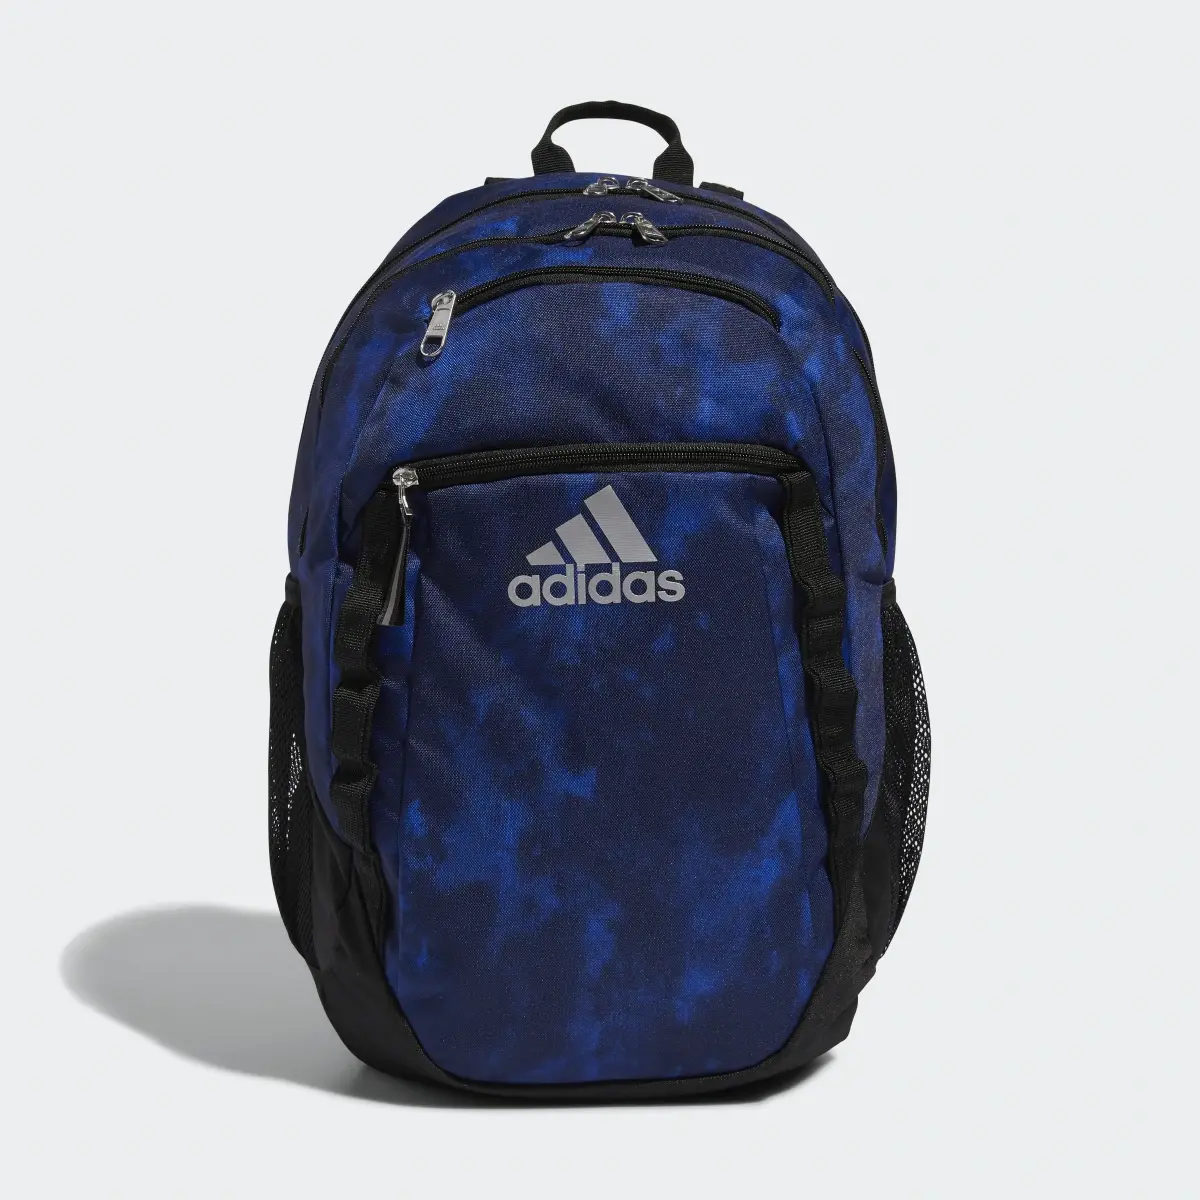 Adidas Excel Backpack. 2